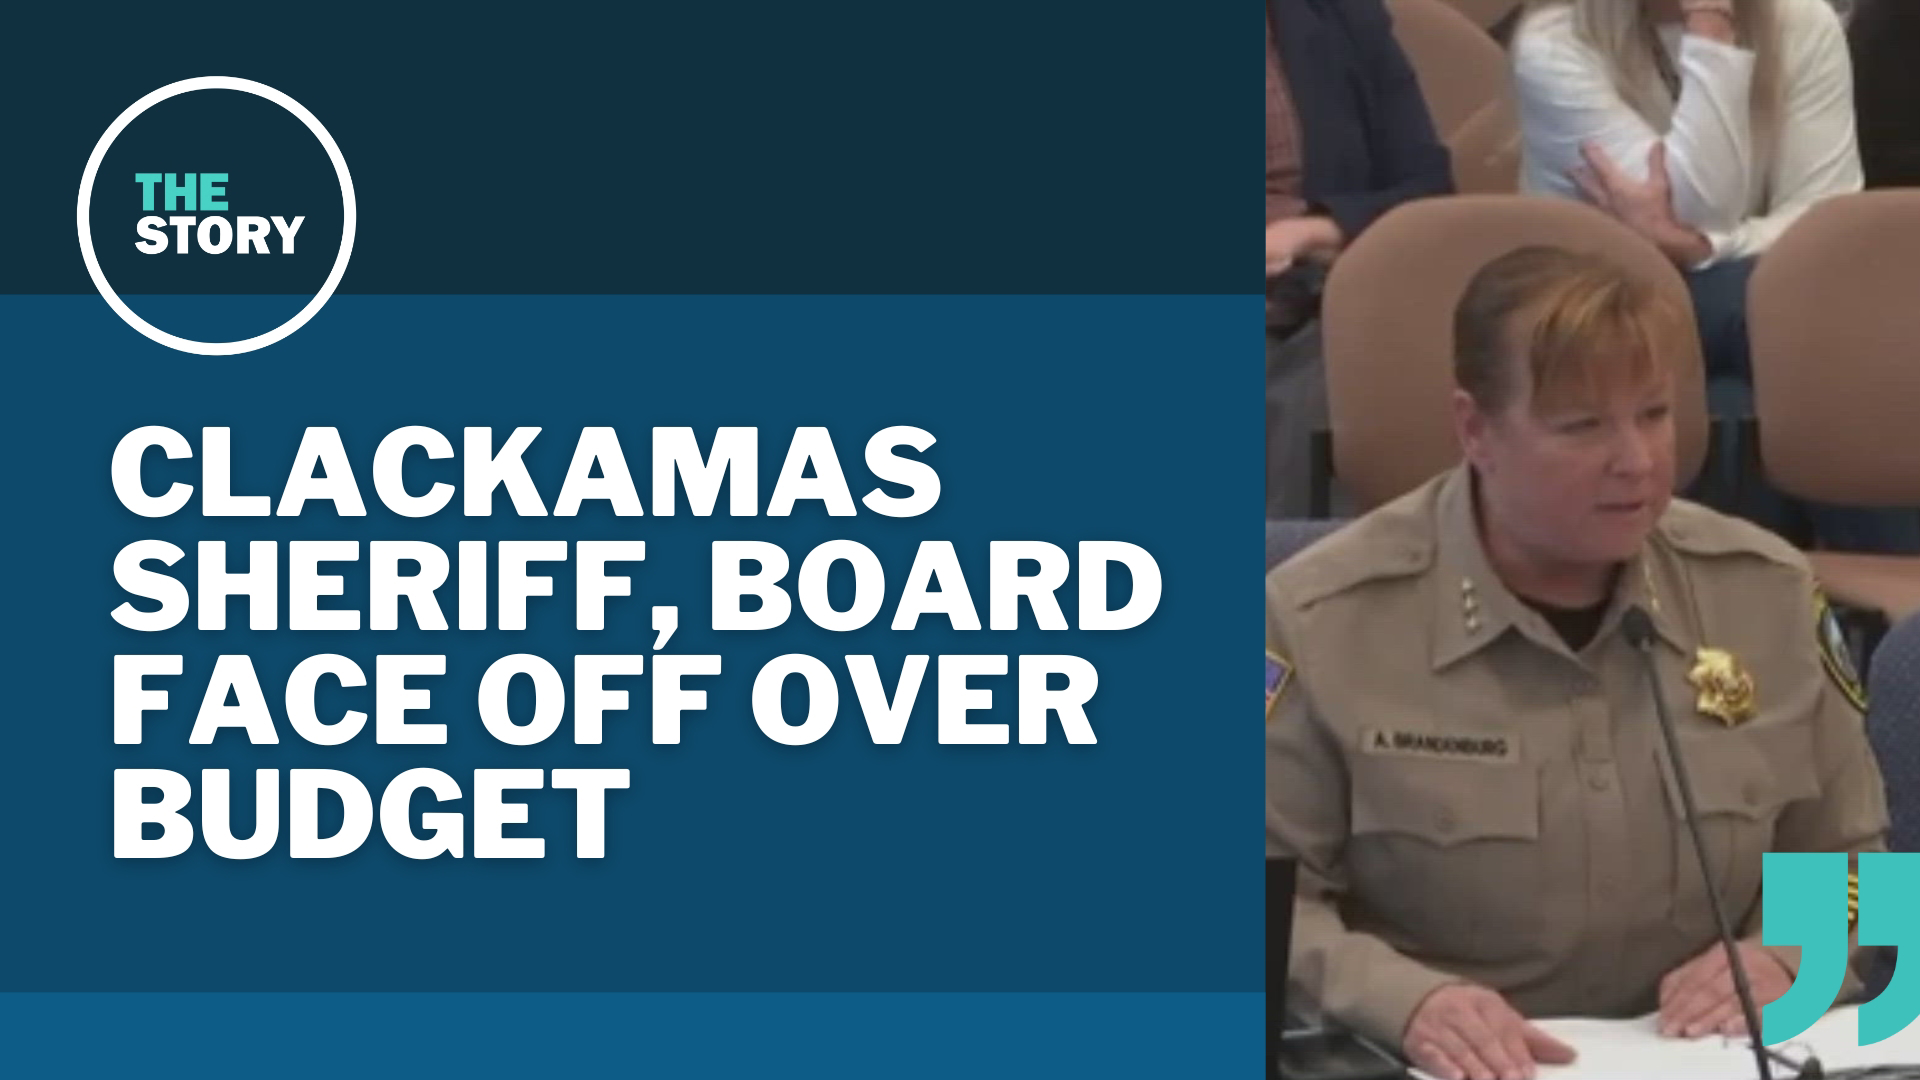 After the sheriff cried foul about the county's plans for her budget, commissioners clapped back with the audit threat and accusations that she's hurting morale.